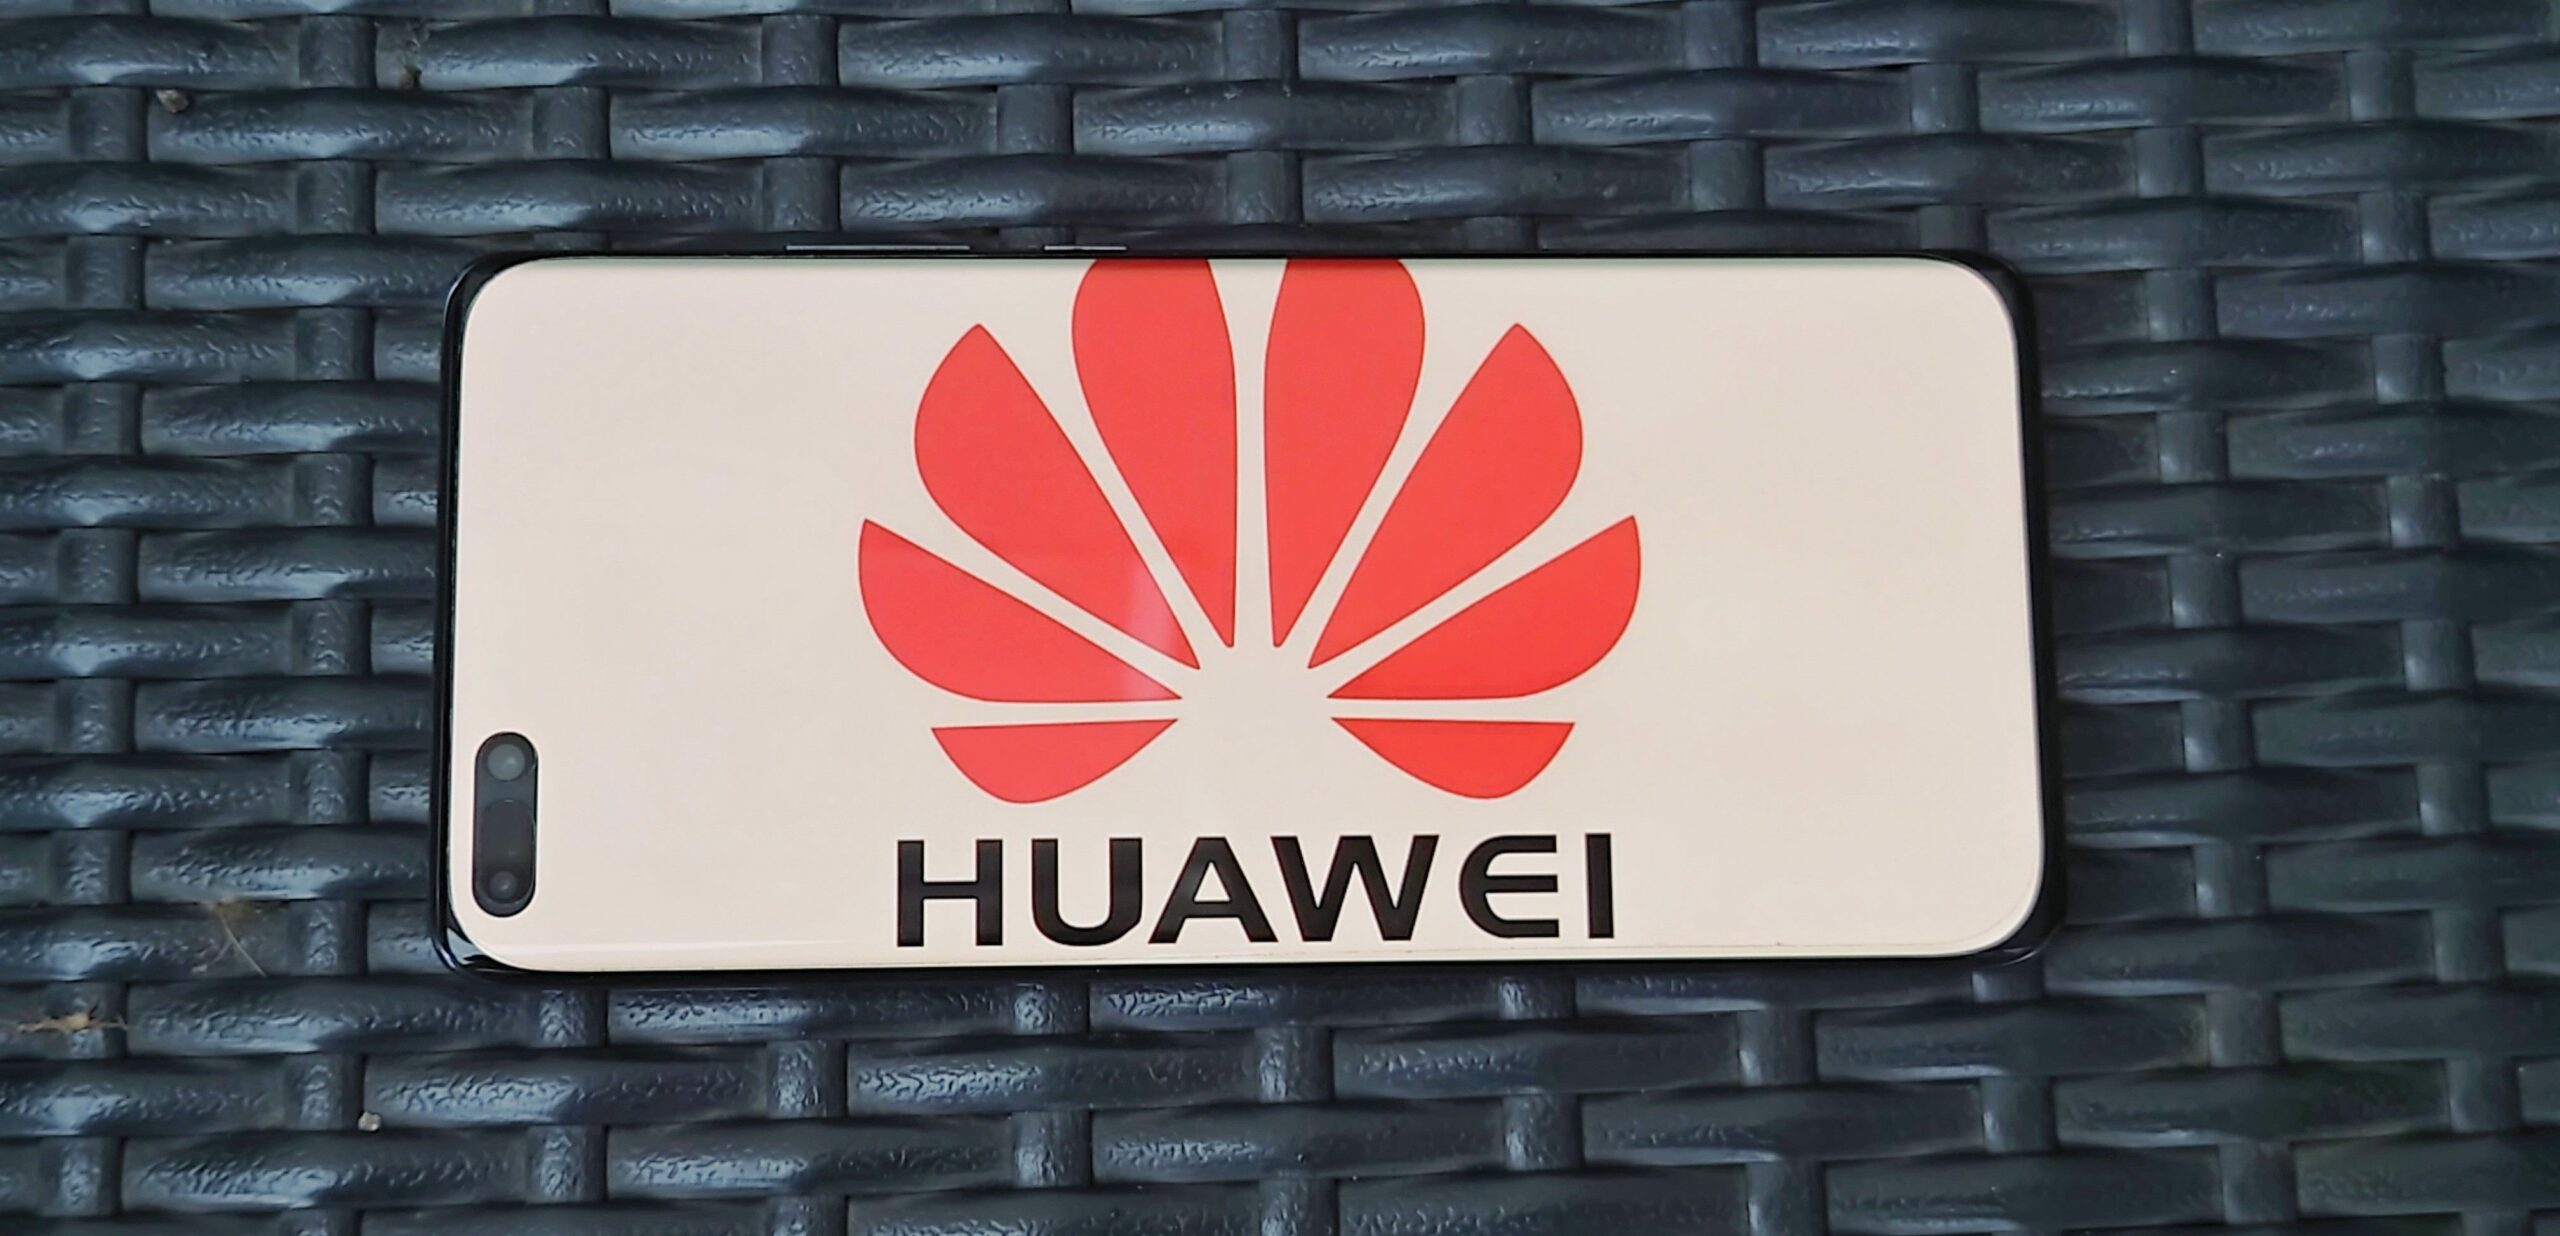 Huawei remains on the blacklist